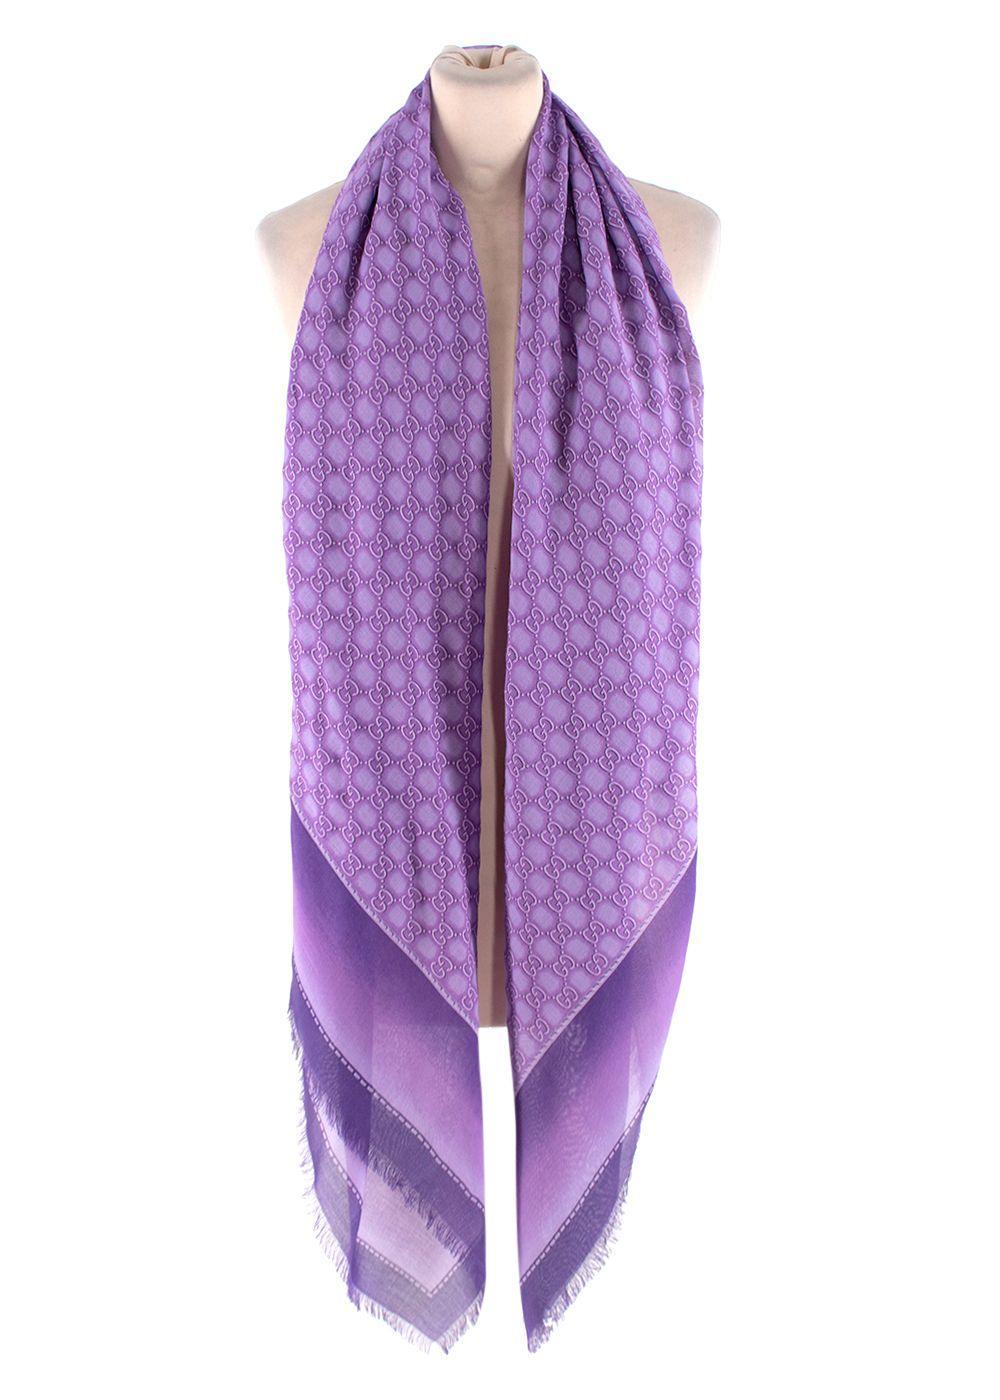 Gucci Lilac GG Monogram Wool Silk Shawl

- Lightweight soft silk and modal blend
- Signature GG monogram with gentle ombre effect and border
- Narrow fringed ends

Materials:
85% Modal
15% Silk

Made in Italy
Professional dry clean only

PLEASE